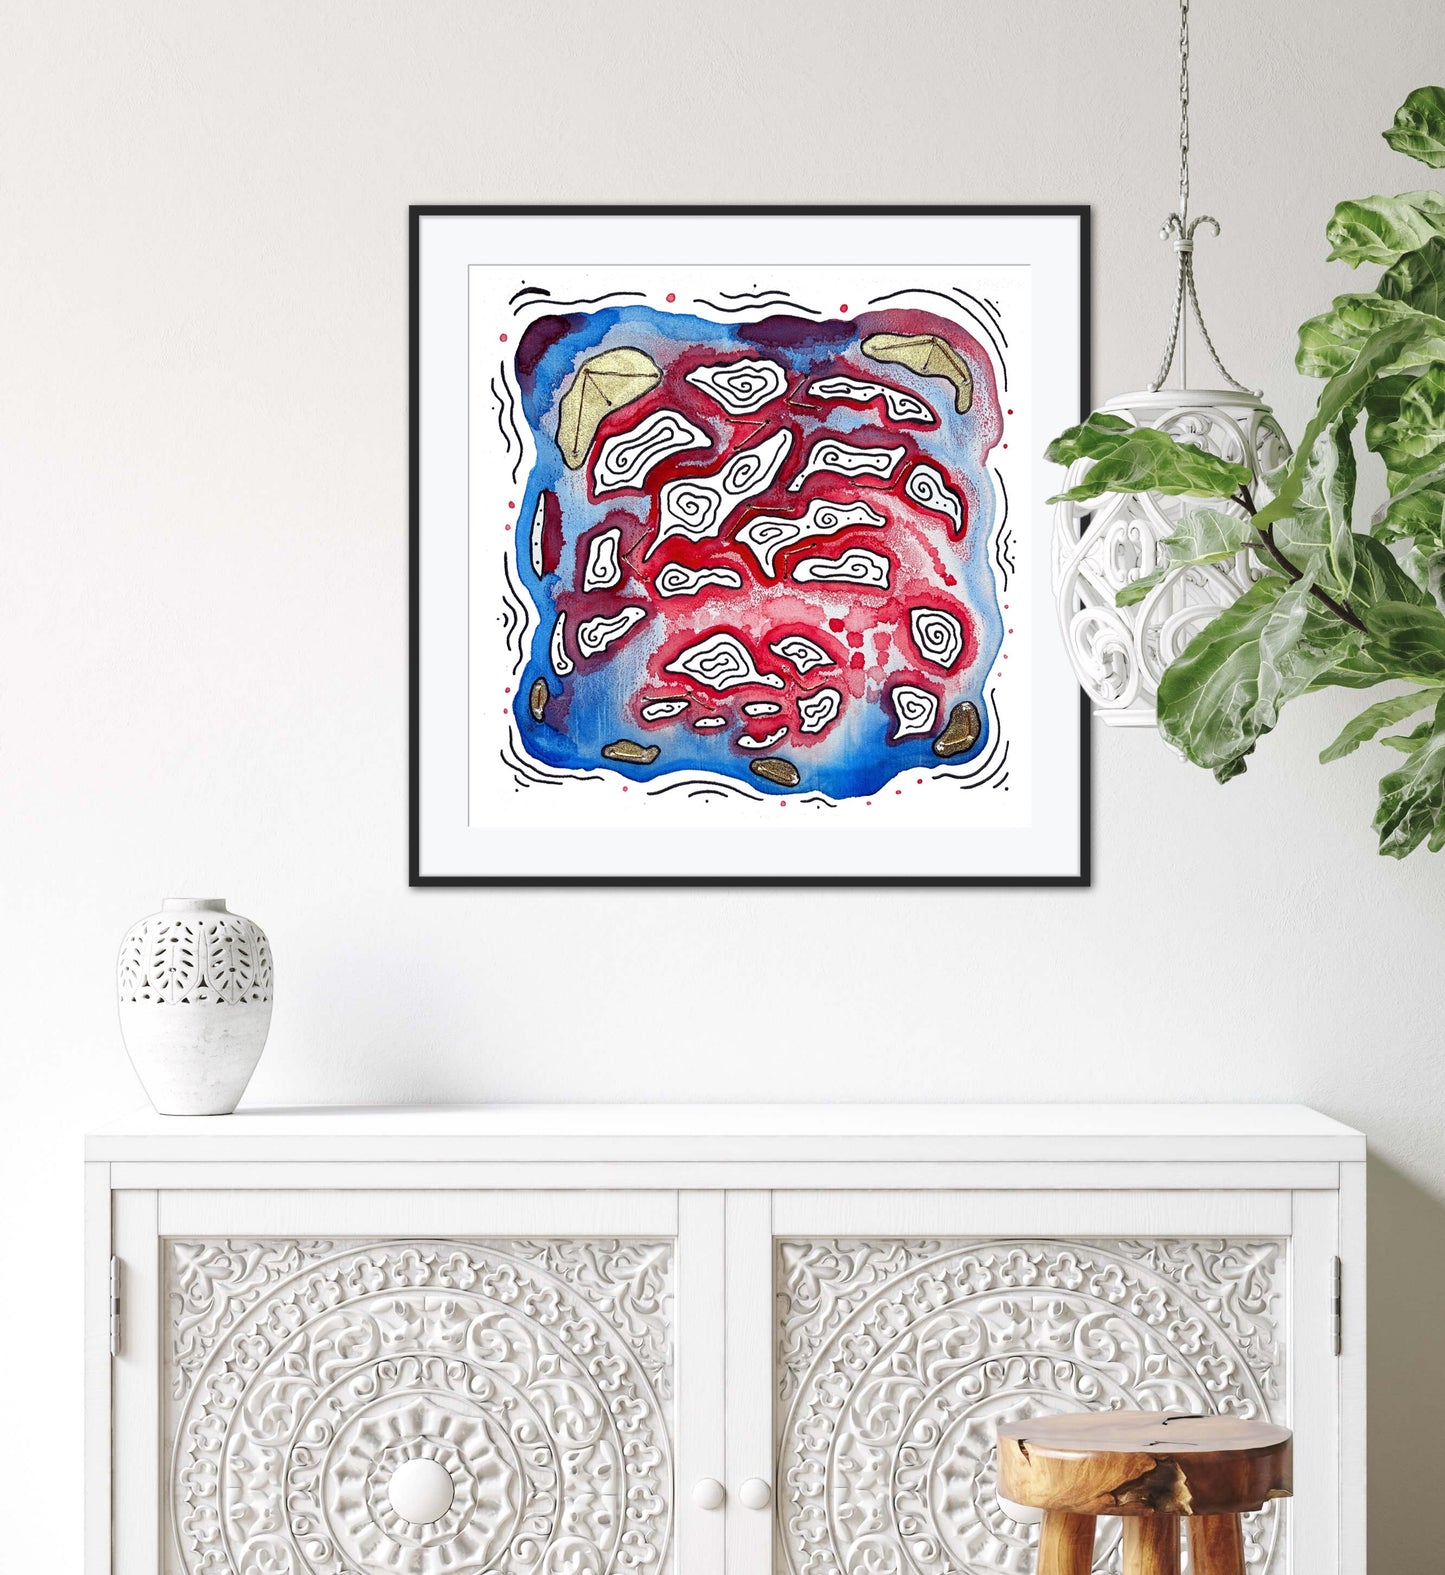 'Ruptura' Embellished Art Print - Signed By the Artist - Limited Edition